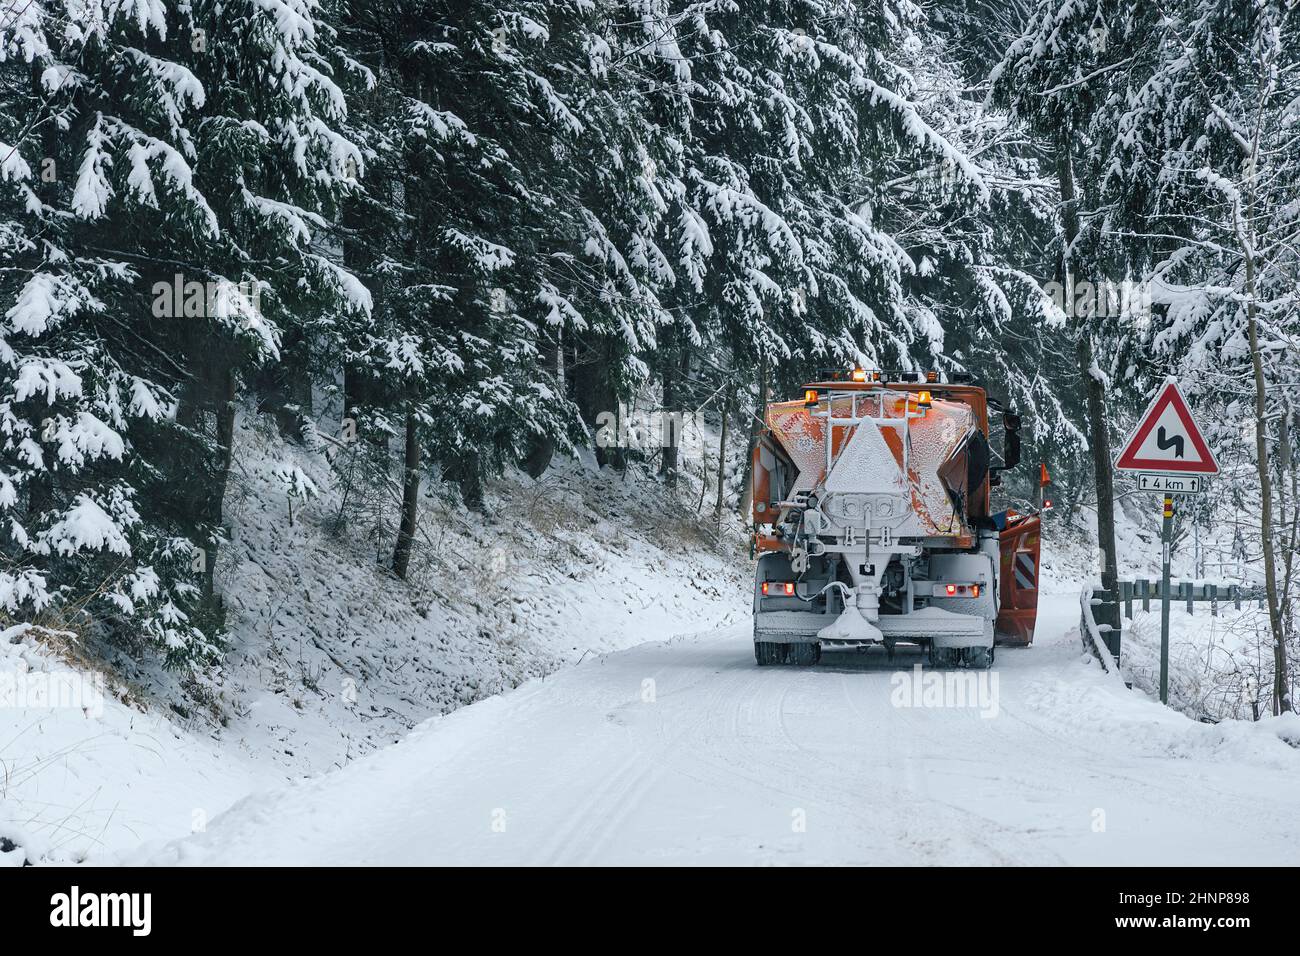 Maintenance roud in winter, truck cleaning snow from road Stock Photo